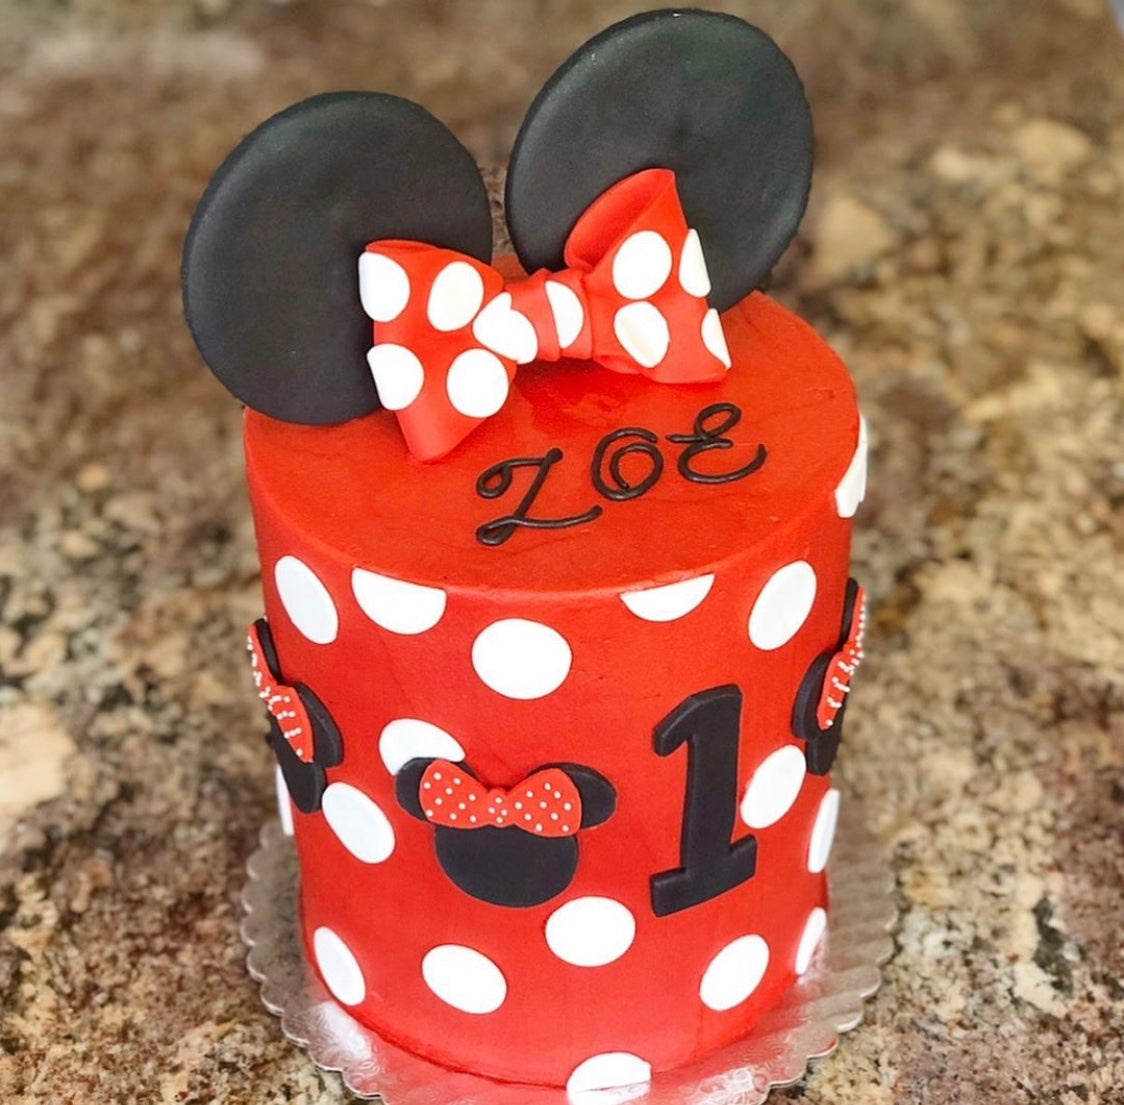 Minnie Mouse Cake – Baked by Bri